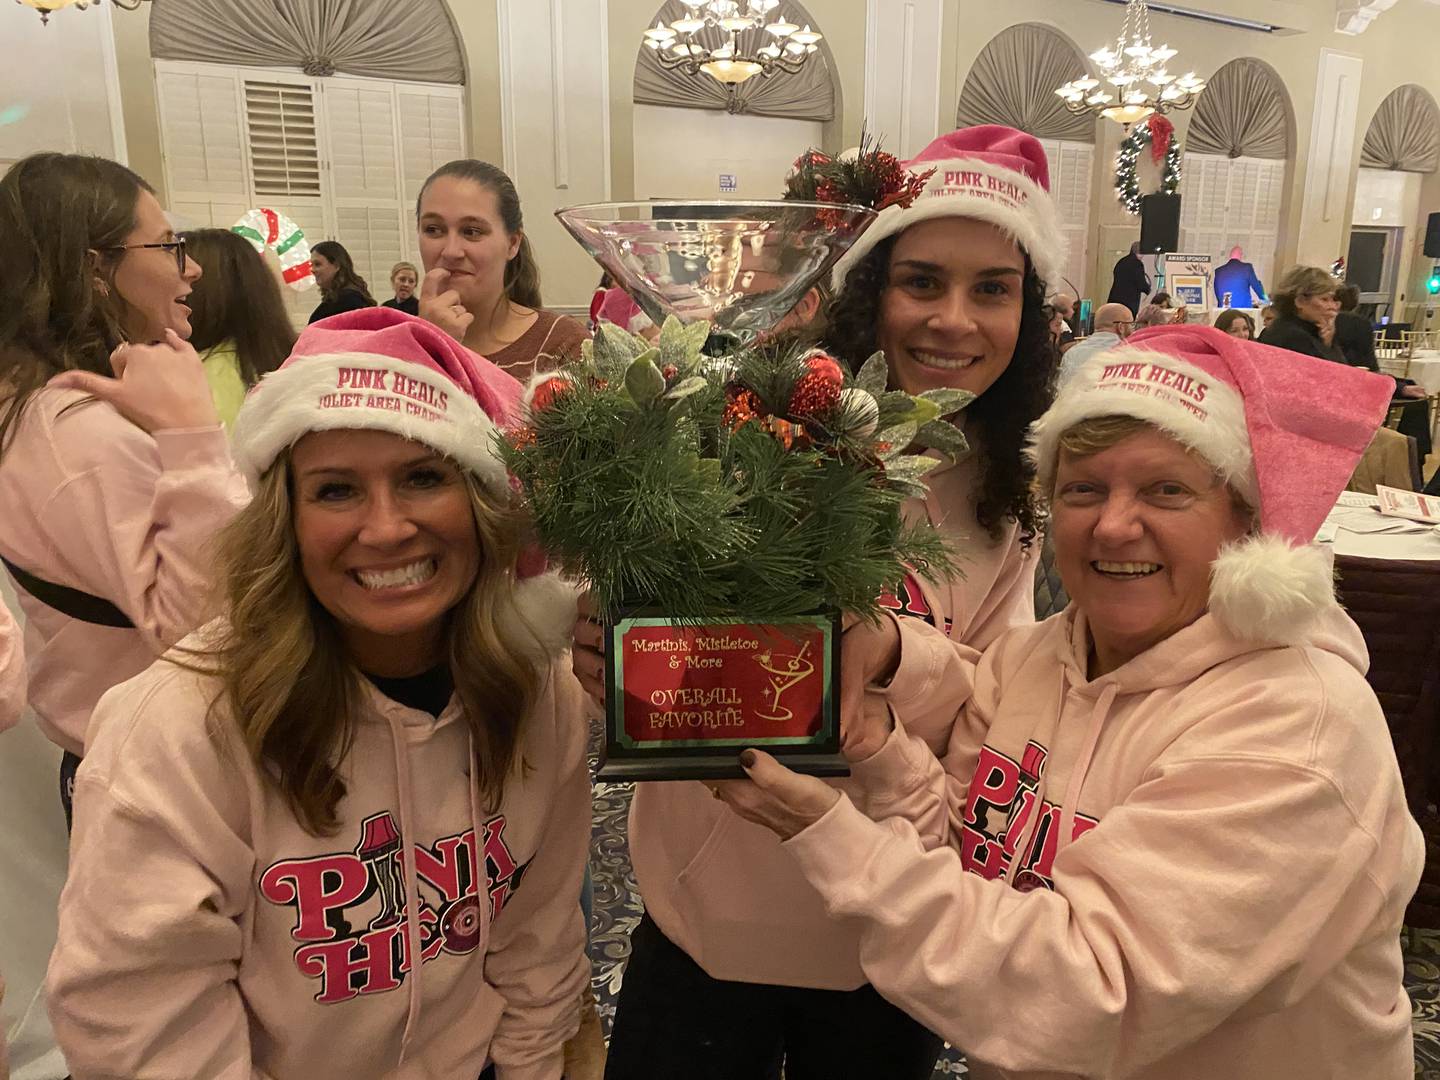 Members of Pink Heals Joliet Area Chapter hold the trophy for their winning martini, "Ralphie's Pink Dream," at Martinis, Mistletoe & More held at the Renaissance Center in Joliet on Monday, Dec. 5, 2022.